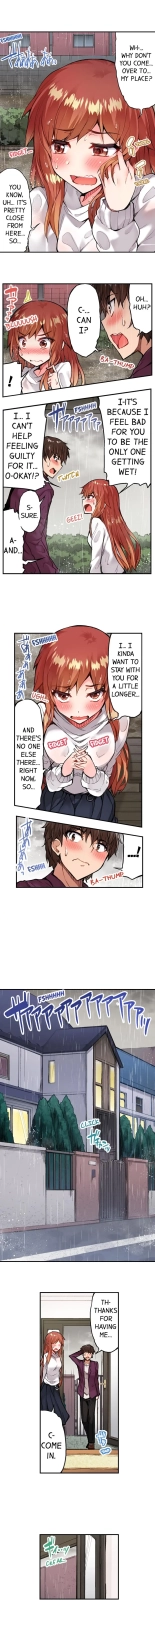 Traditional Job of Washing Girls' Body Ch. 1-171 : page 680